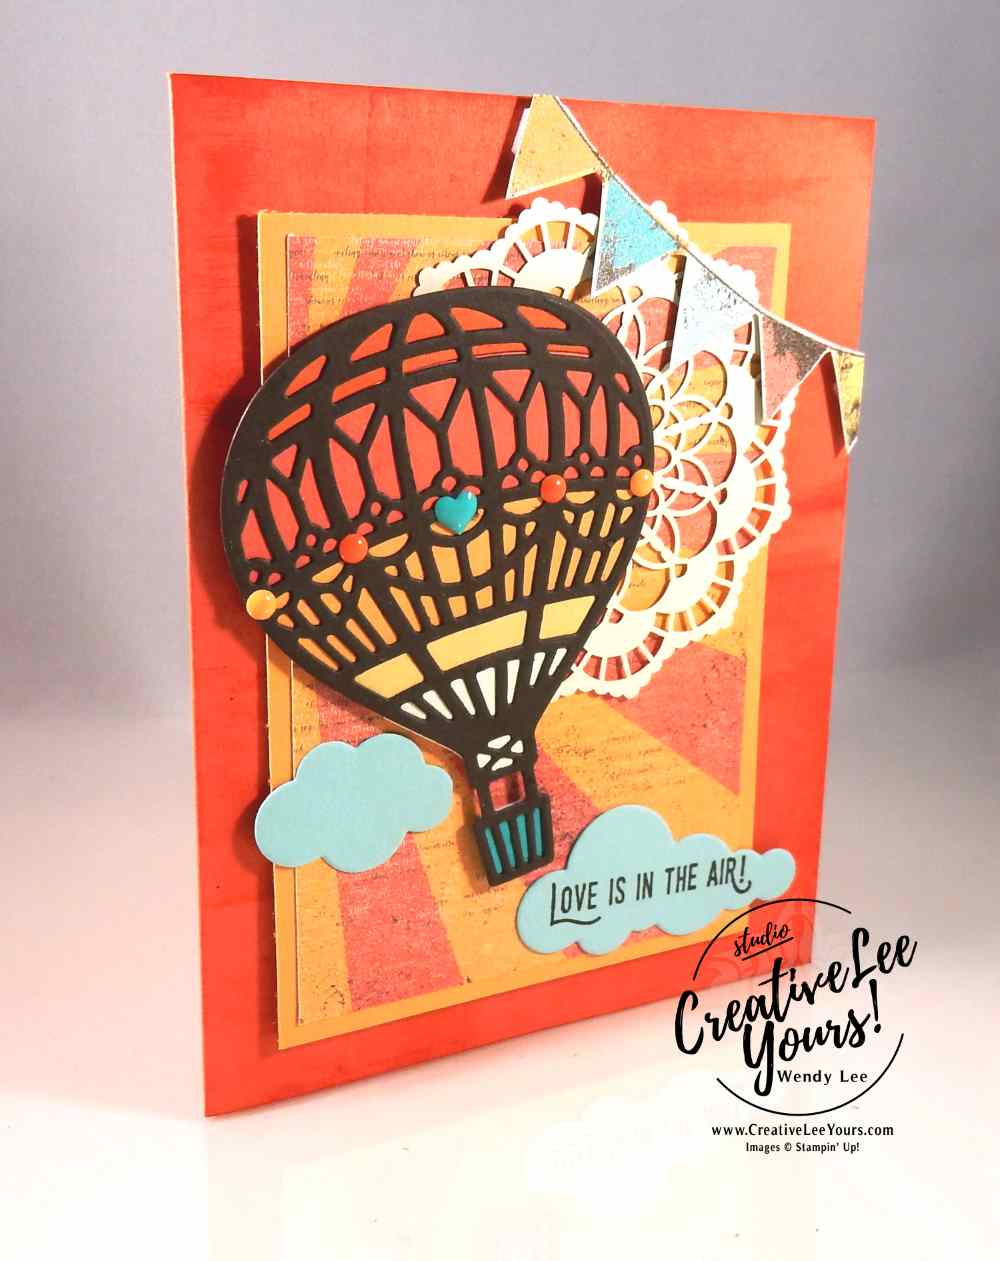 Love is in the Air Direct Ink to Paper by Wendy Lee, Stampin Up, #creativeleeyours, Lift me up stamp set, Bloomin love stamp set, up & away thinlits, January 2017 FMN class